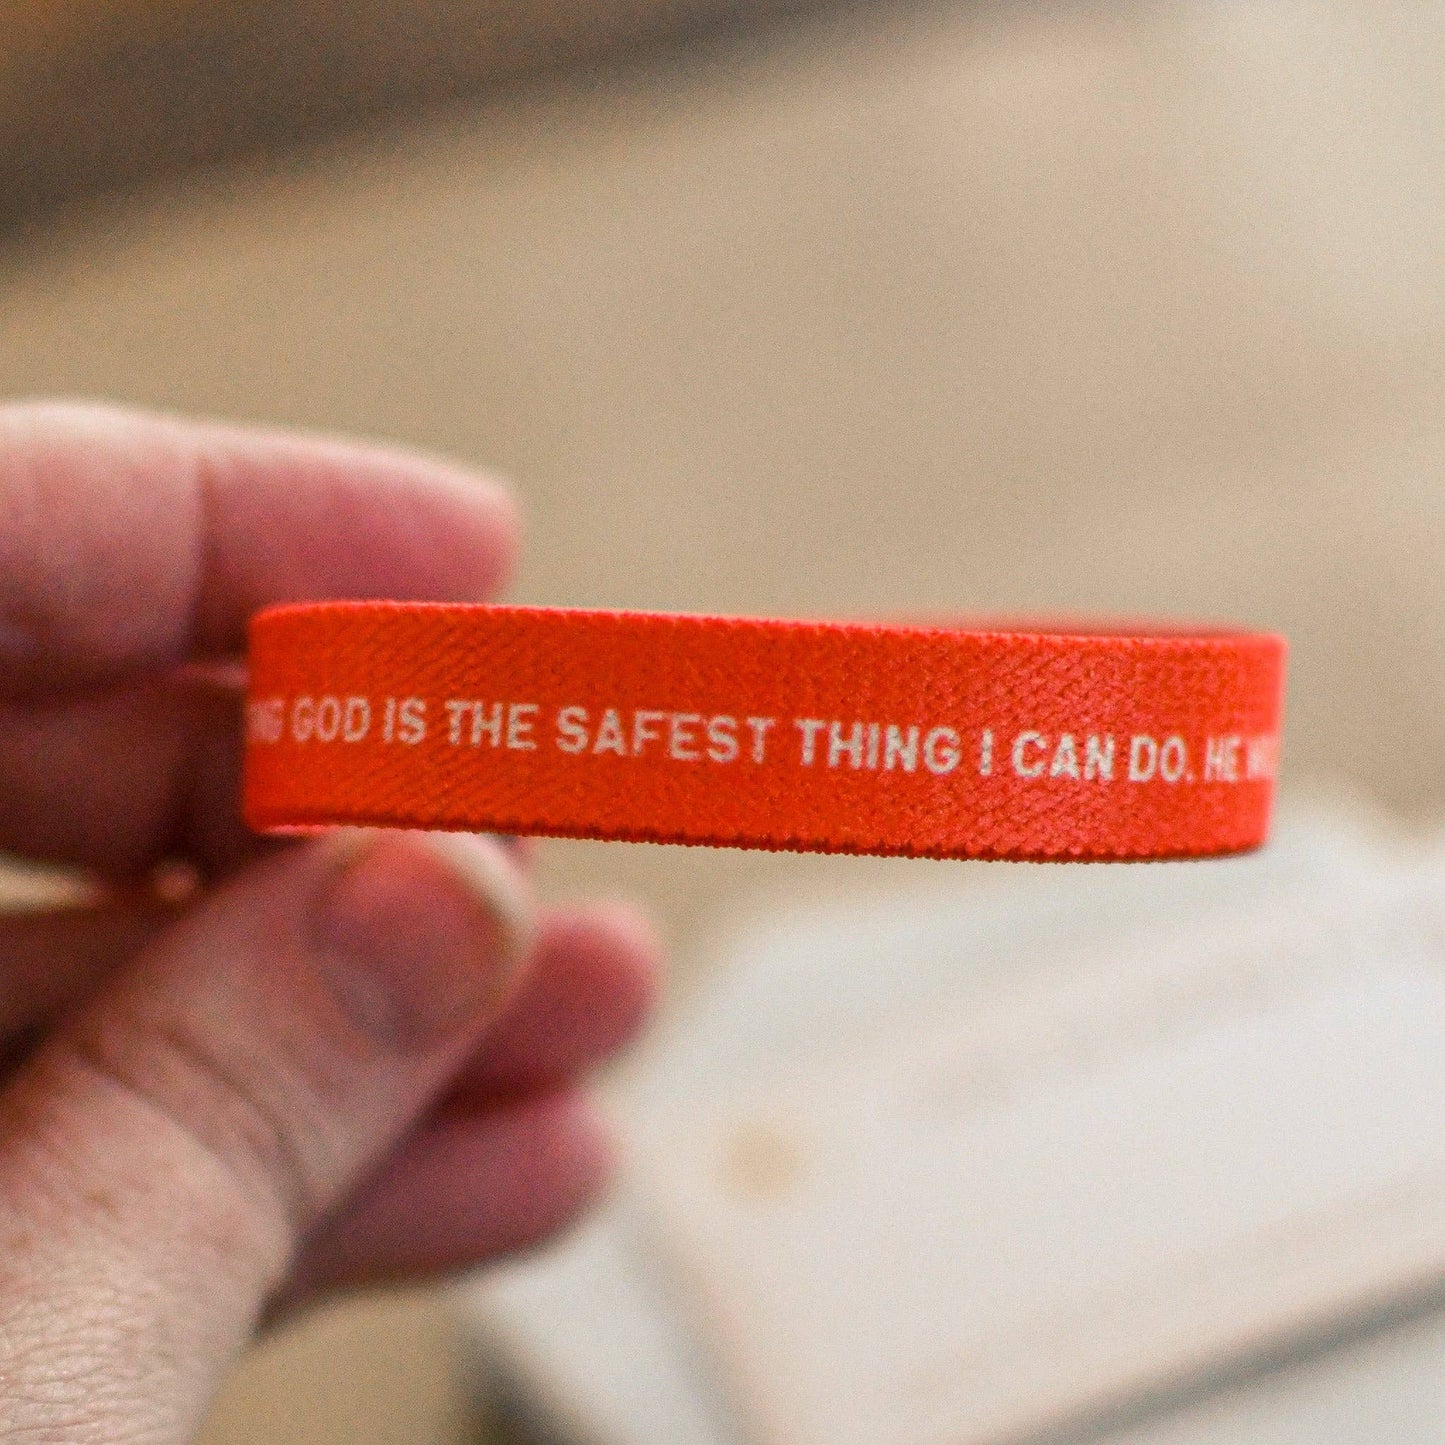 Trusting Is Safe Elastic Wristband